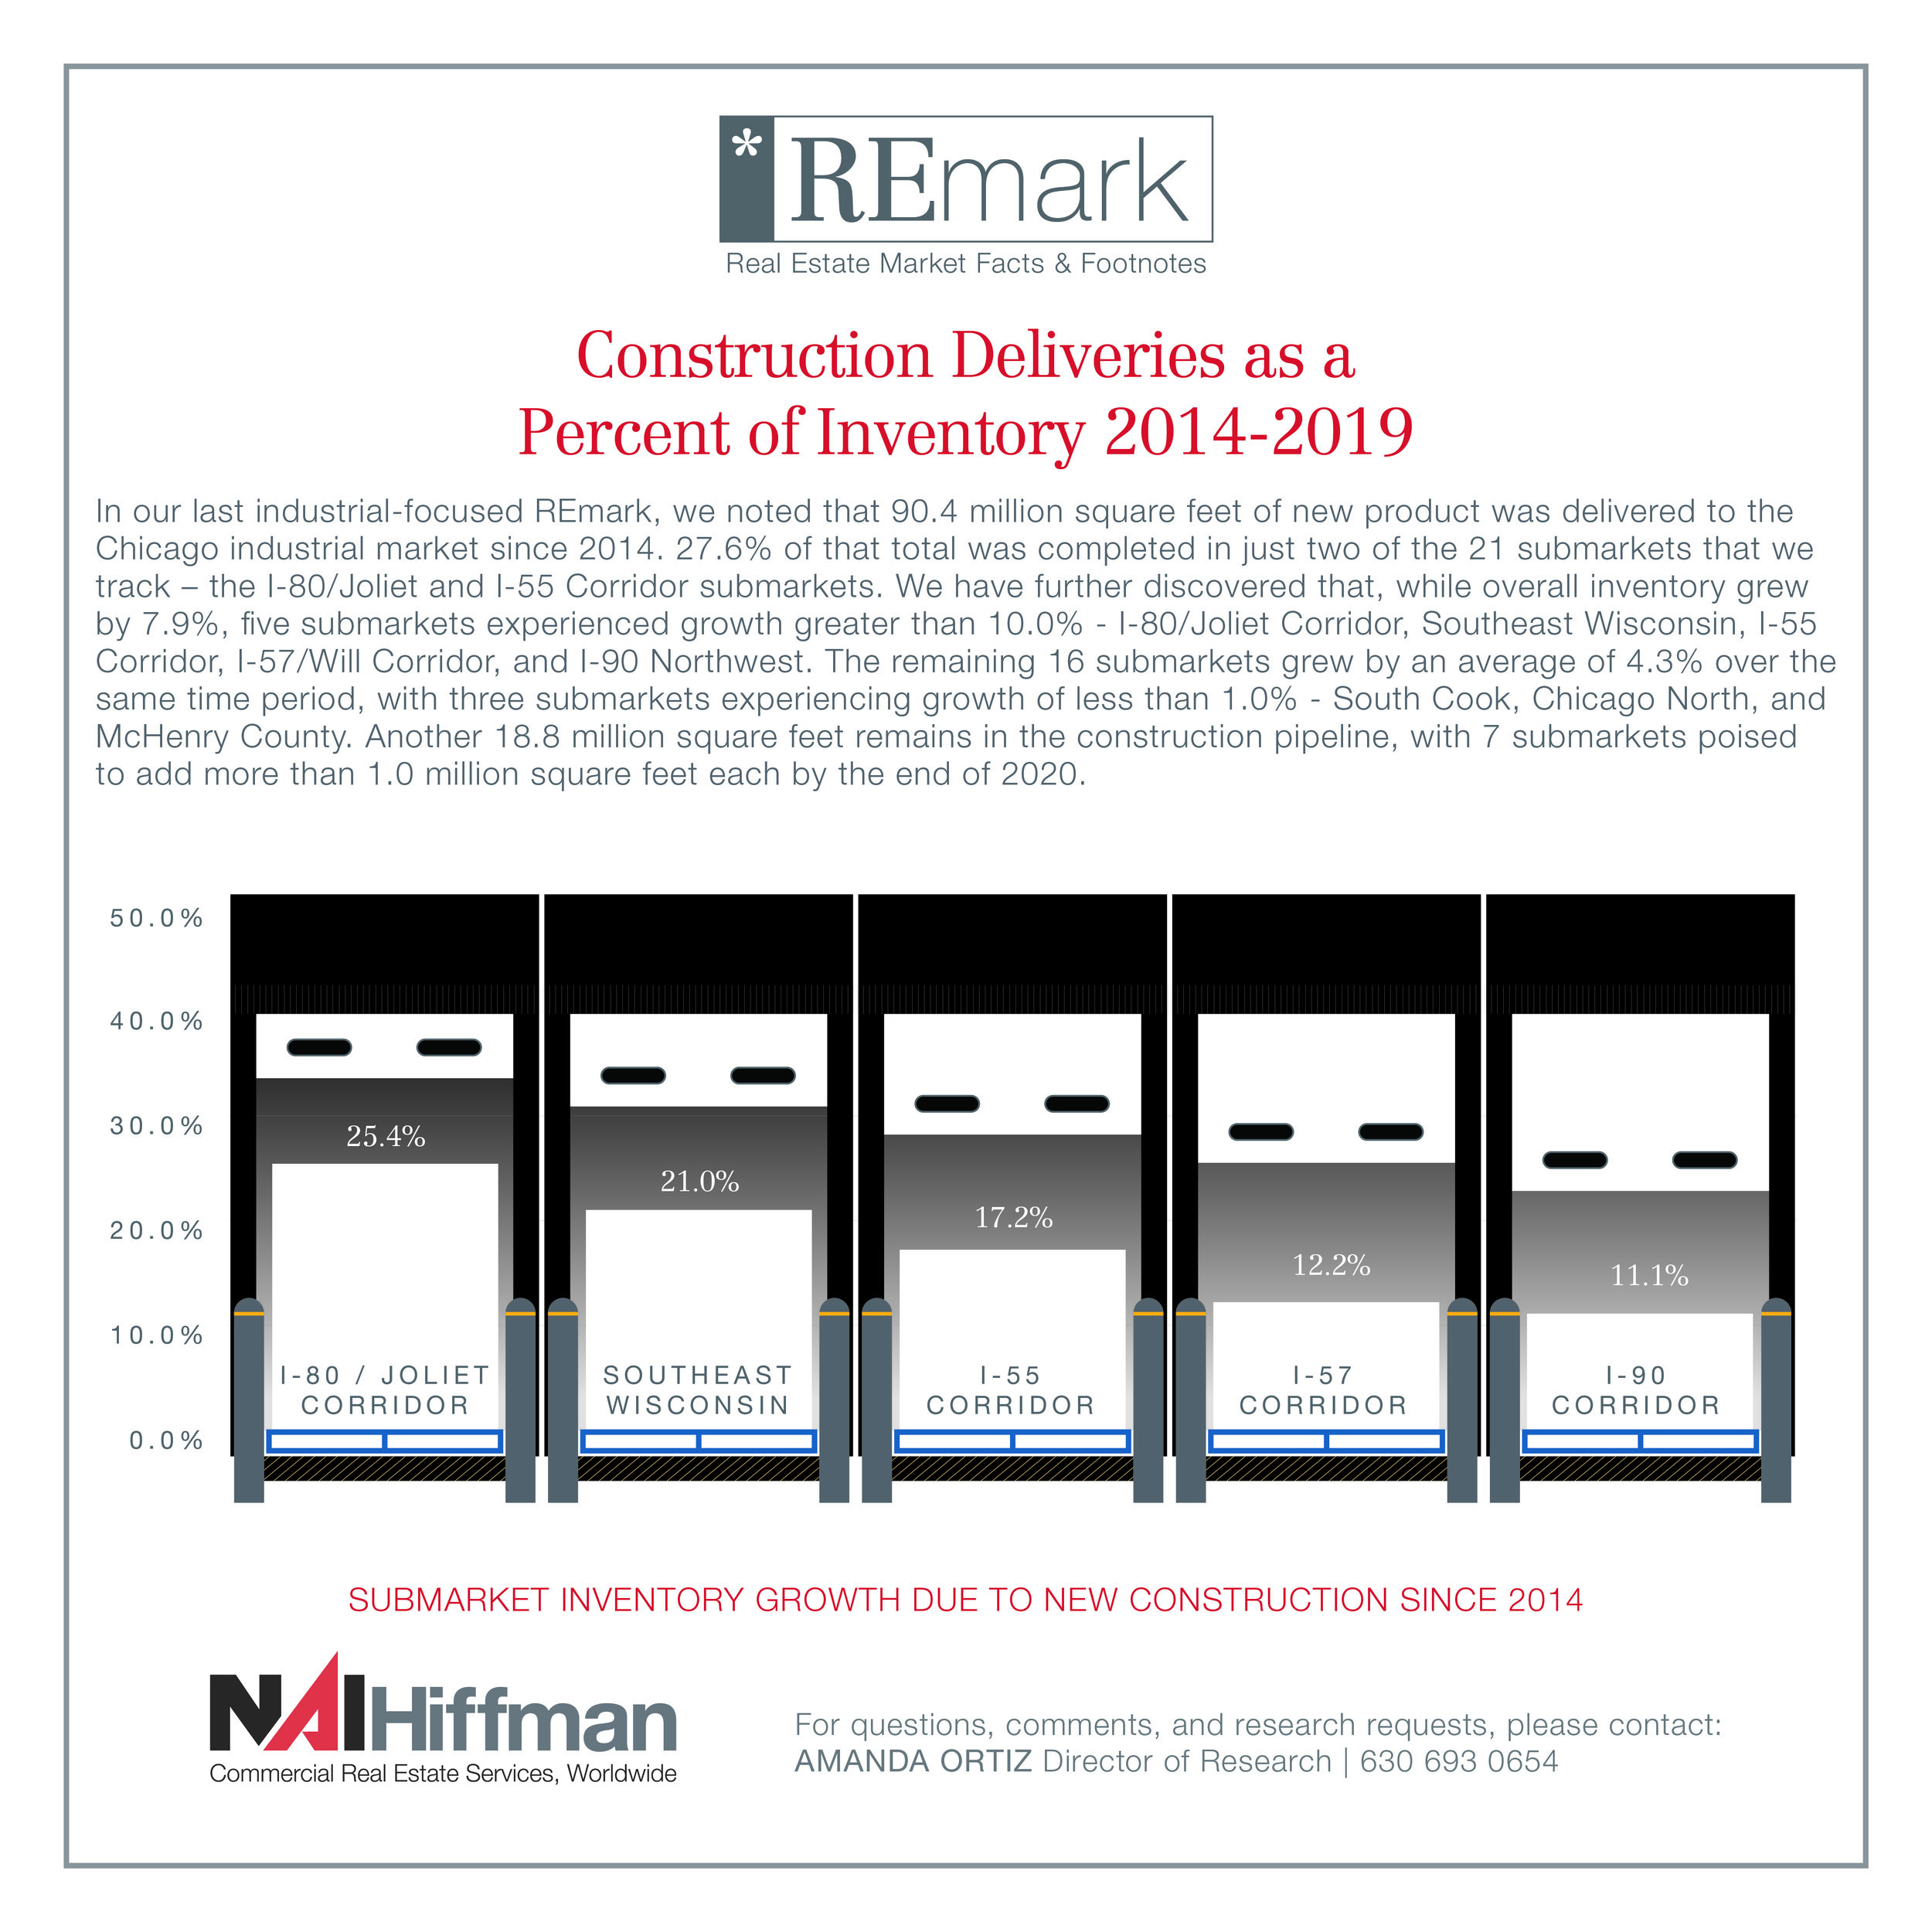 September REmark | Construction Deliveries as a Percent of Inventory 2014-2019